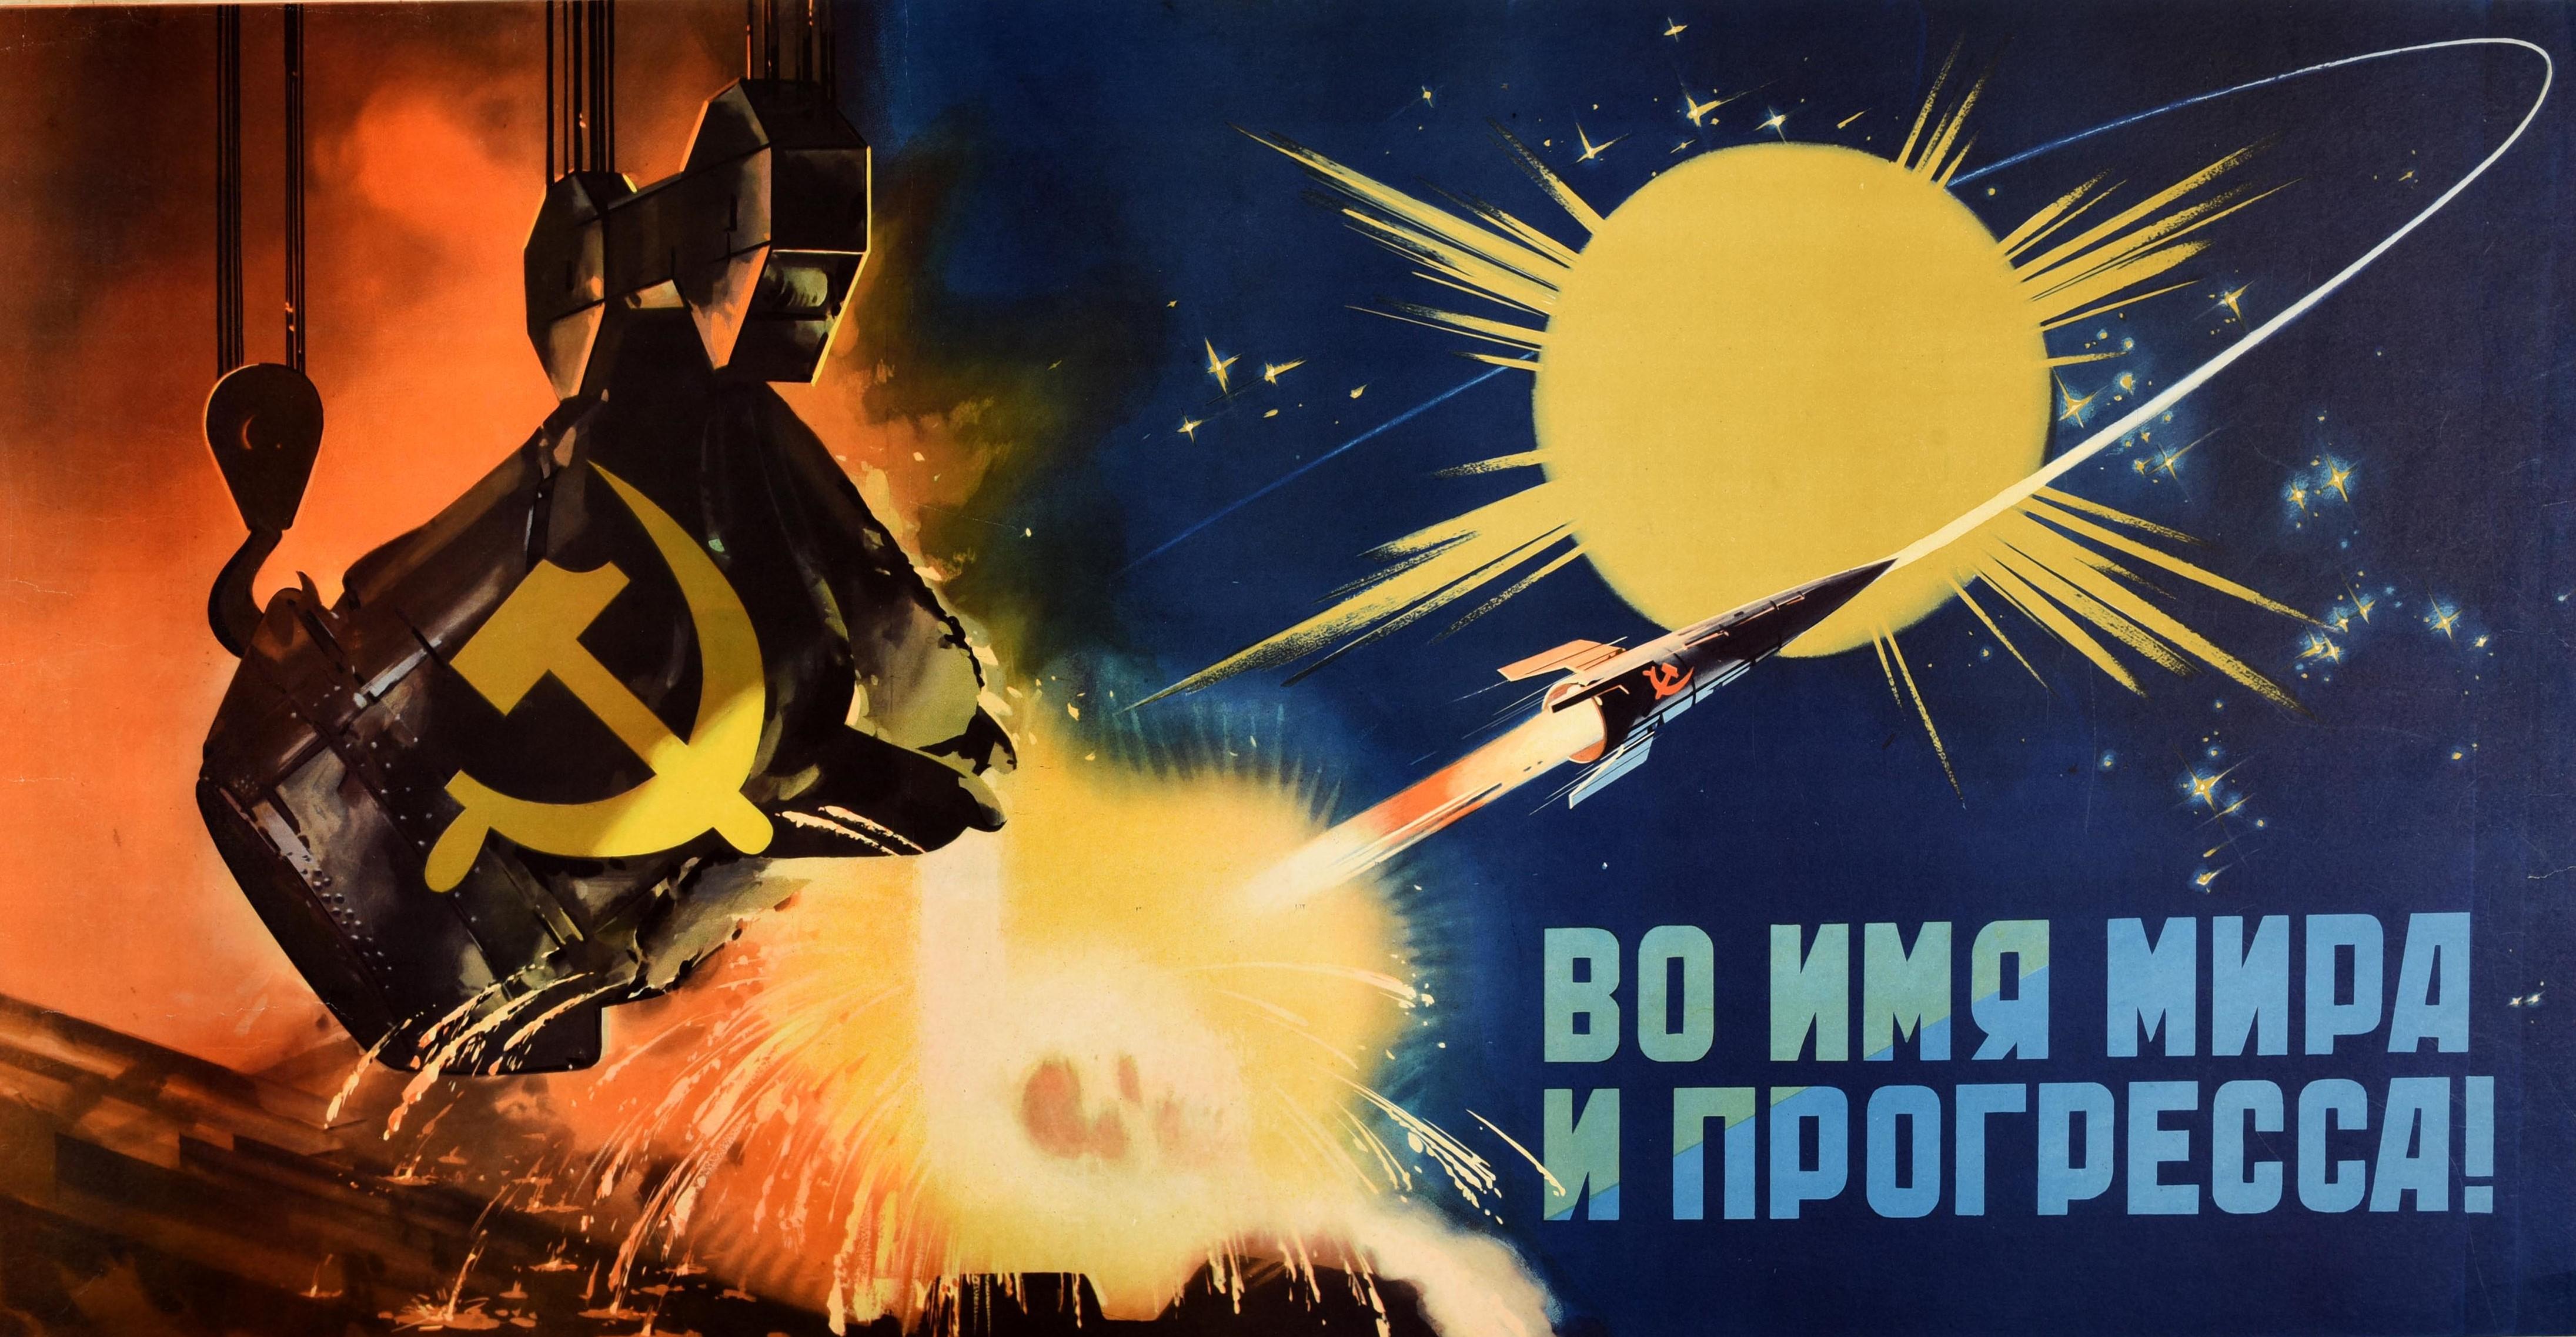 Mid-20th Century Original Vintage Soviet Poster In The Name Of Peace And Progress USSR Space Race